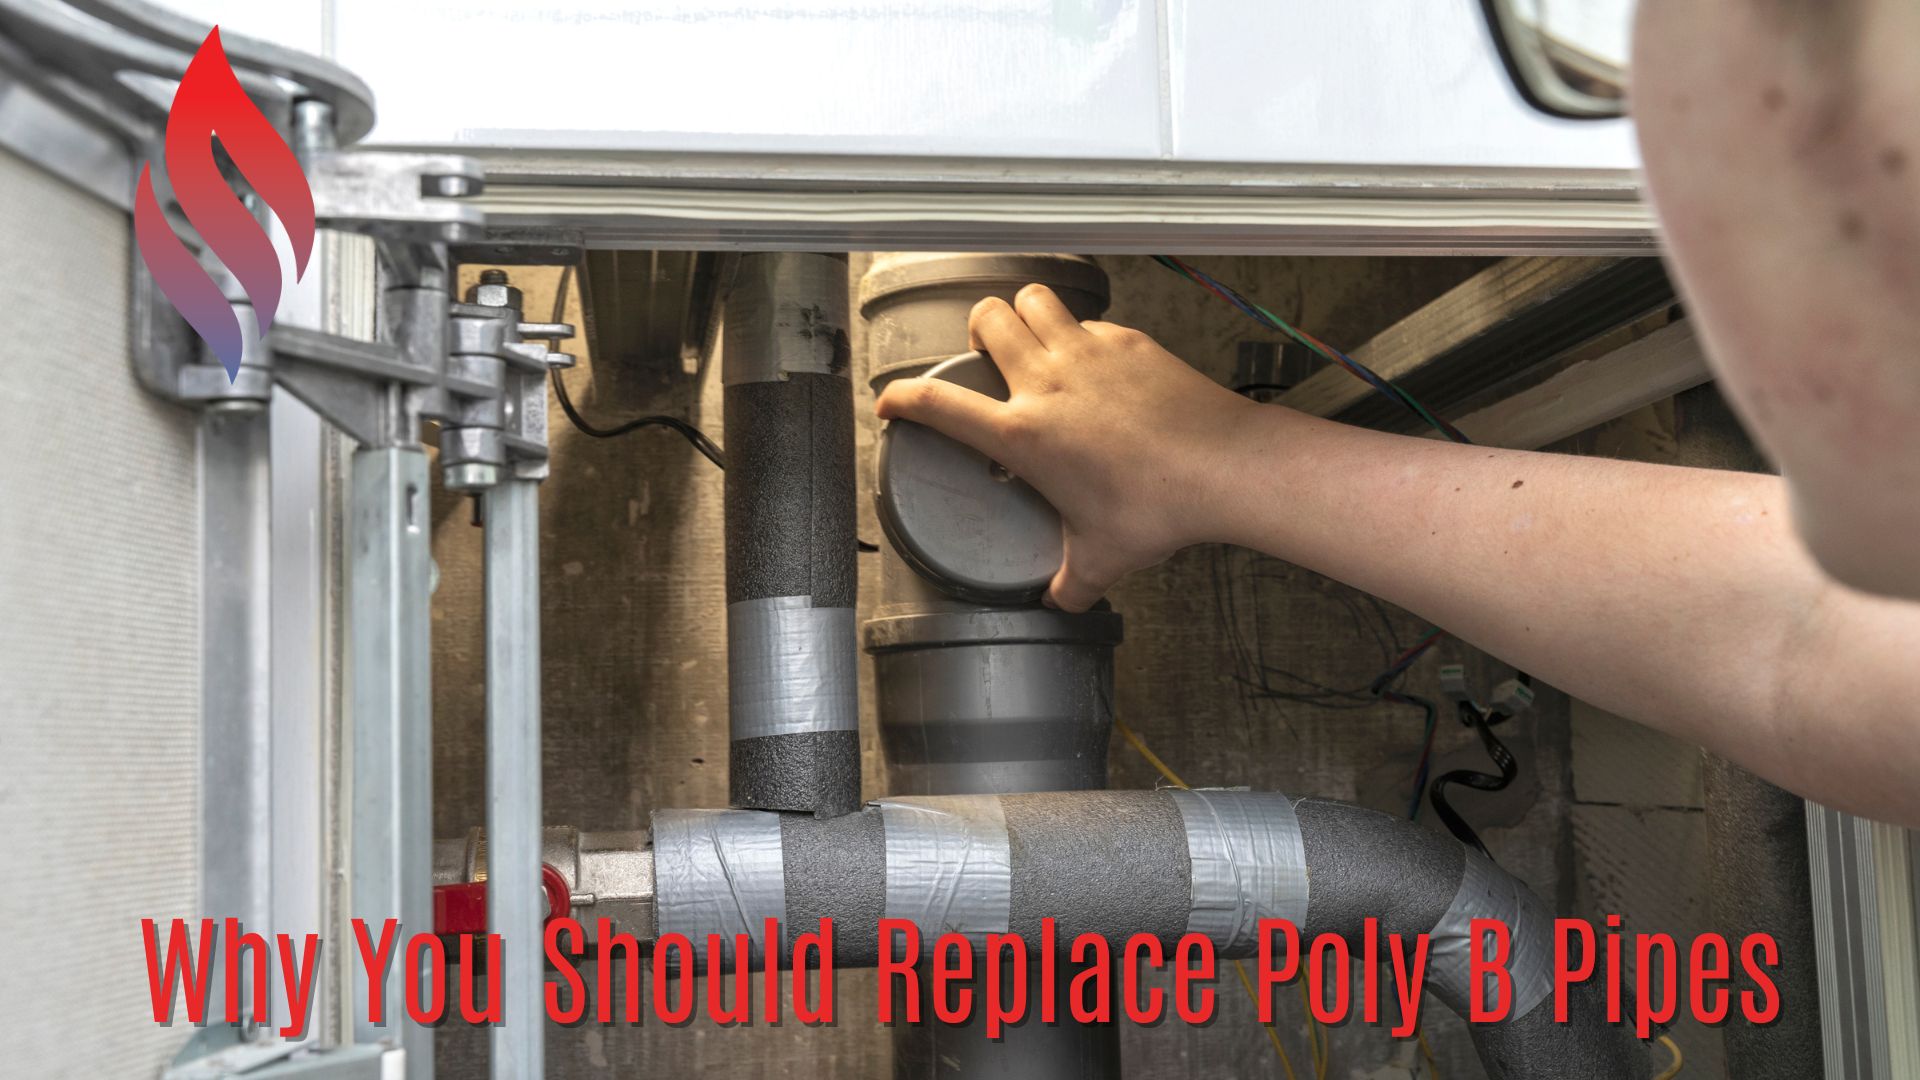 Why You Should Replace Poly B Pipes? - By Hinse Mechanical